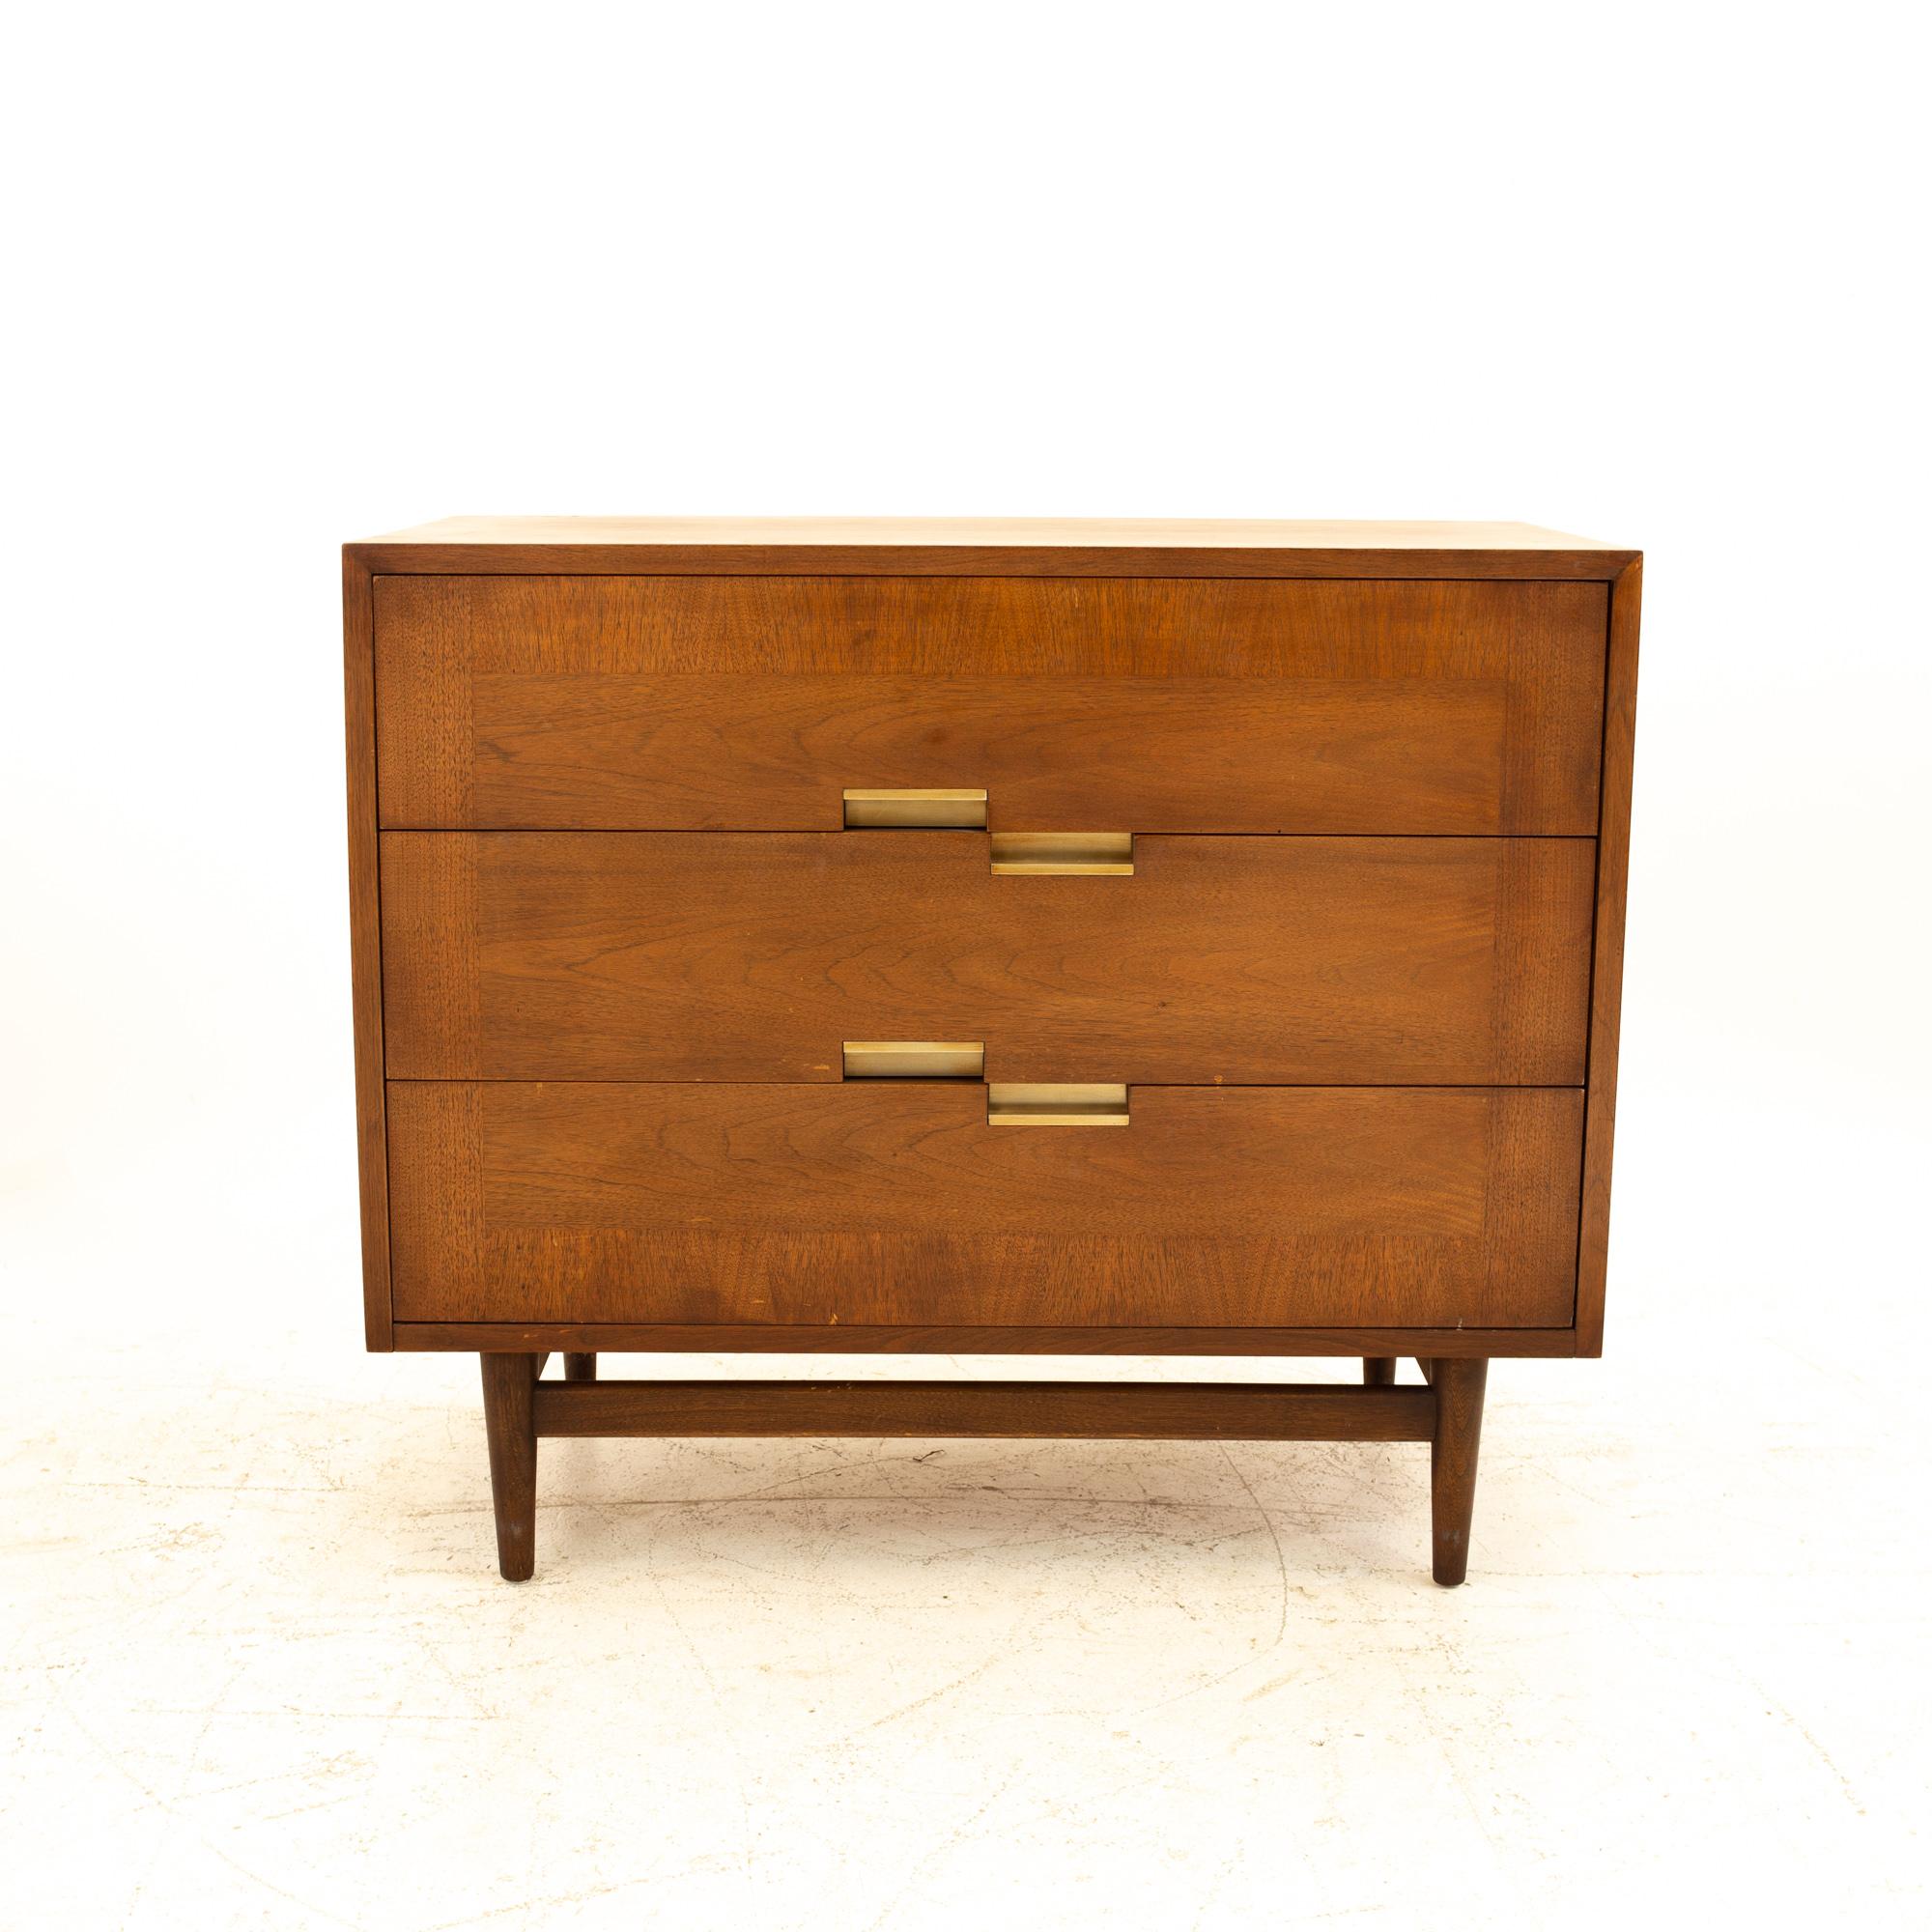 Merton Gershun for America of Martinsville midcentury 3 drawer dresser chest
Dresser measures: 36 wide x 18.5 deep x 31 high 

All pieces of furniture can be had in what we call restored vintage condition. This means the piece is restored upon